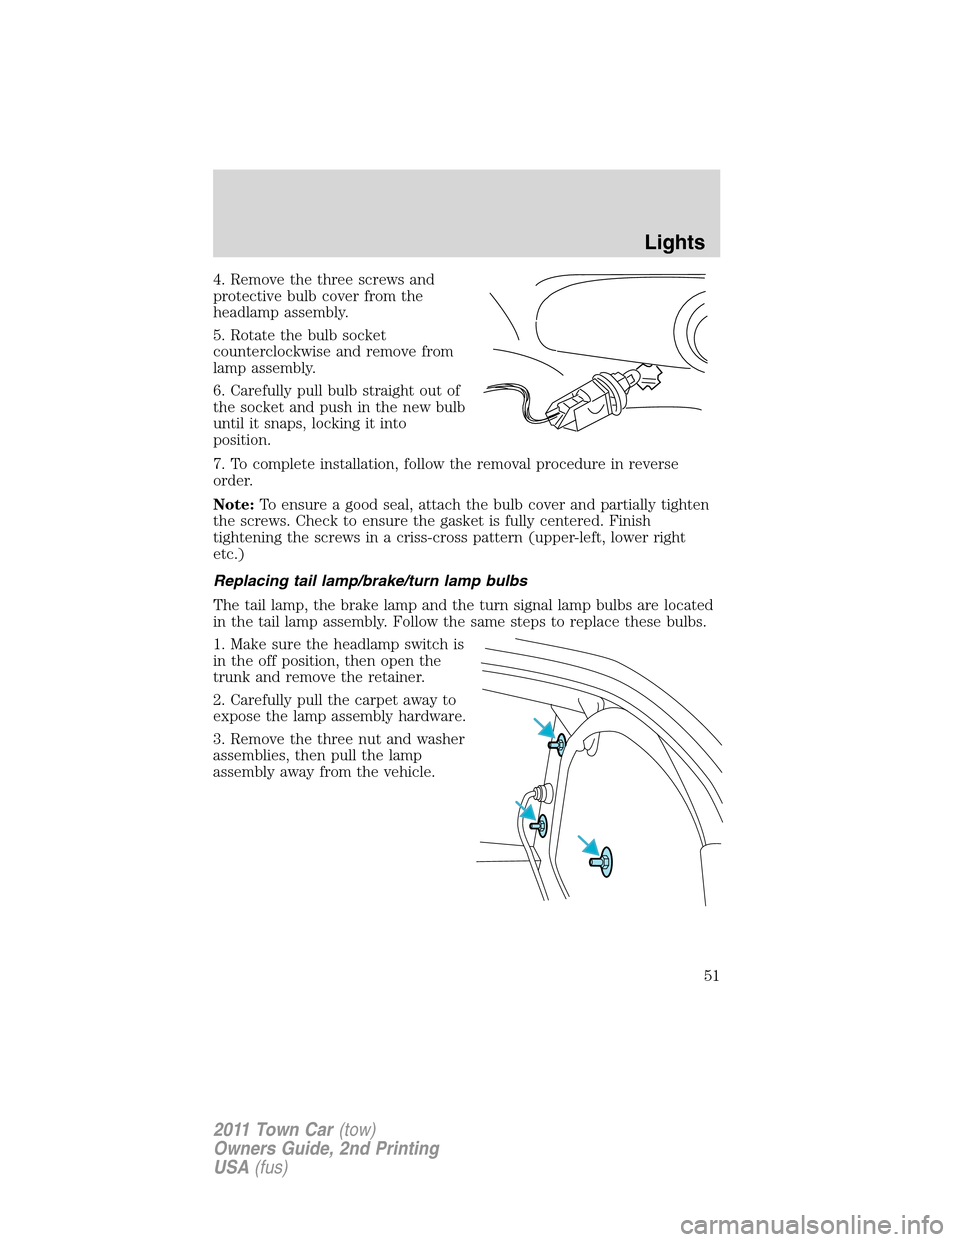 LINCOLN TOWN CAR 2011 User Guide 4. Remove the three screws and
protective bulb cover from the
headlamp assembly.
5. Rotate the bulb socket
counterclockwise and remove from
lamp assembly.
6. Carefully pull bulb straight out of
the so